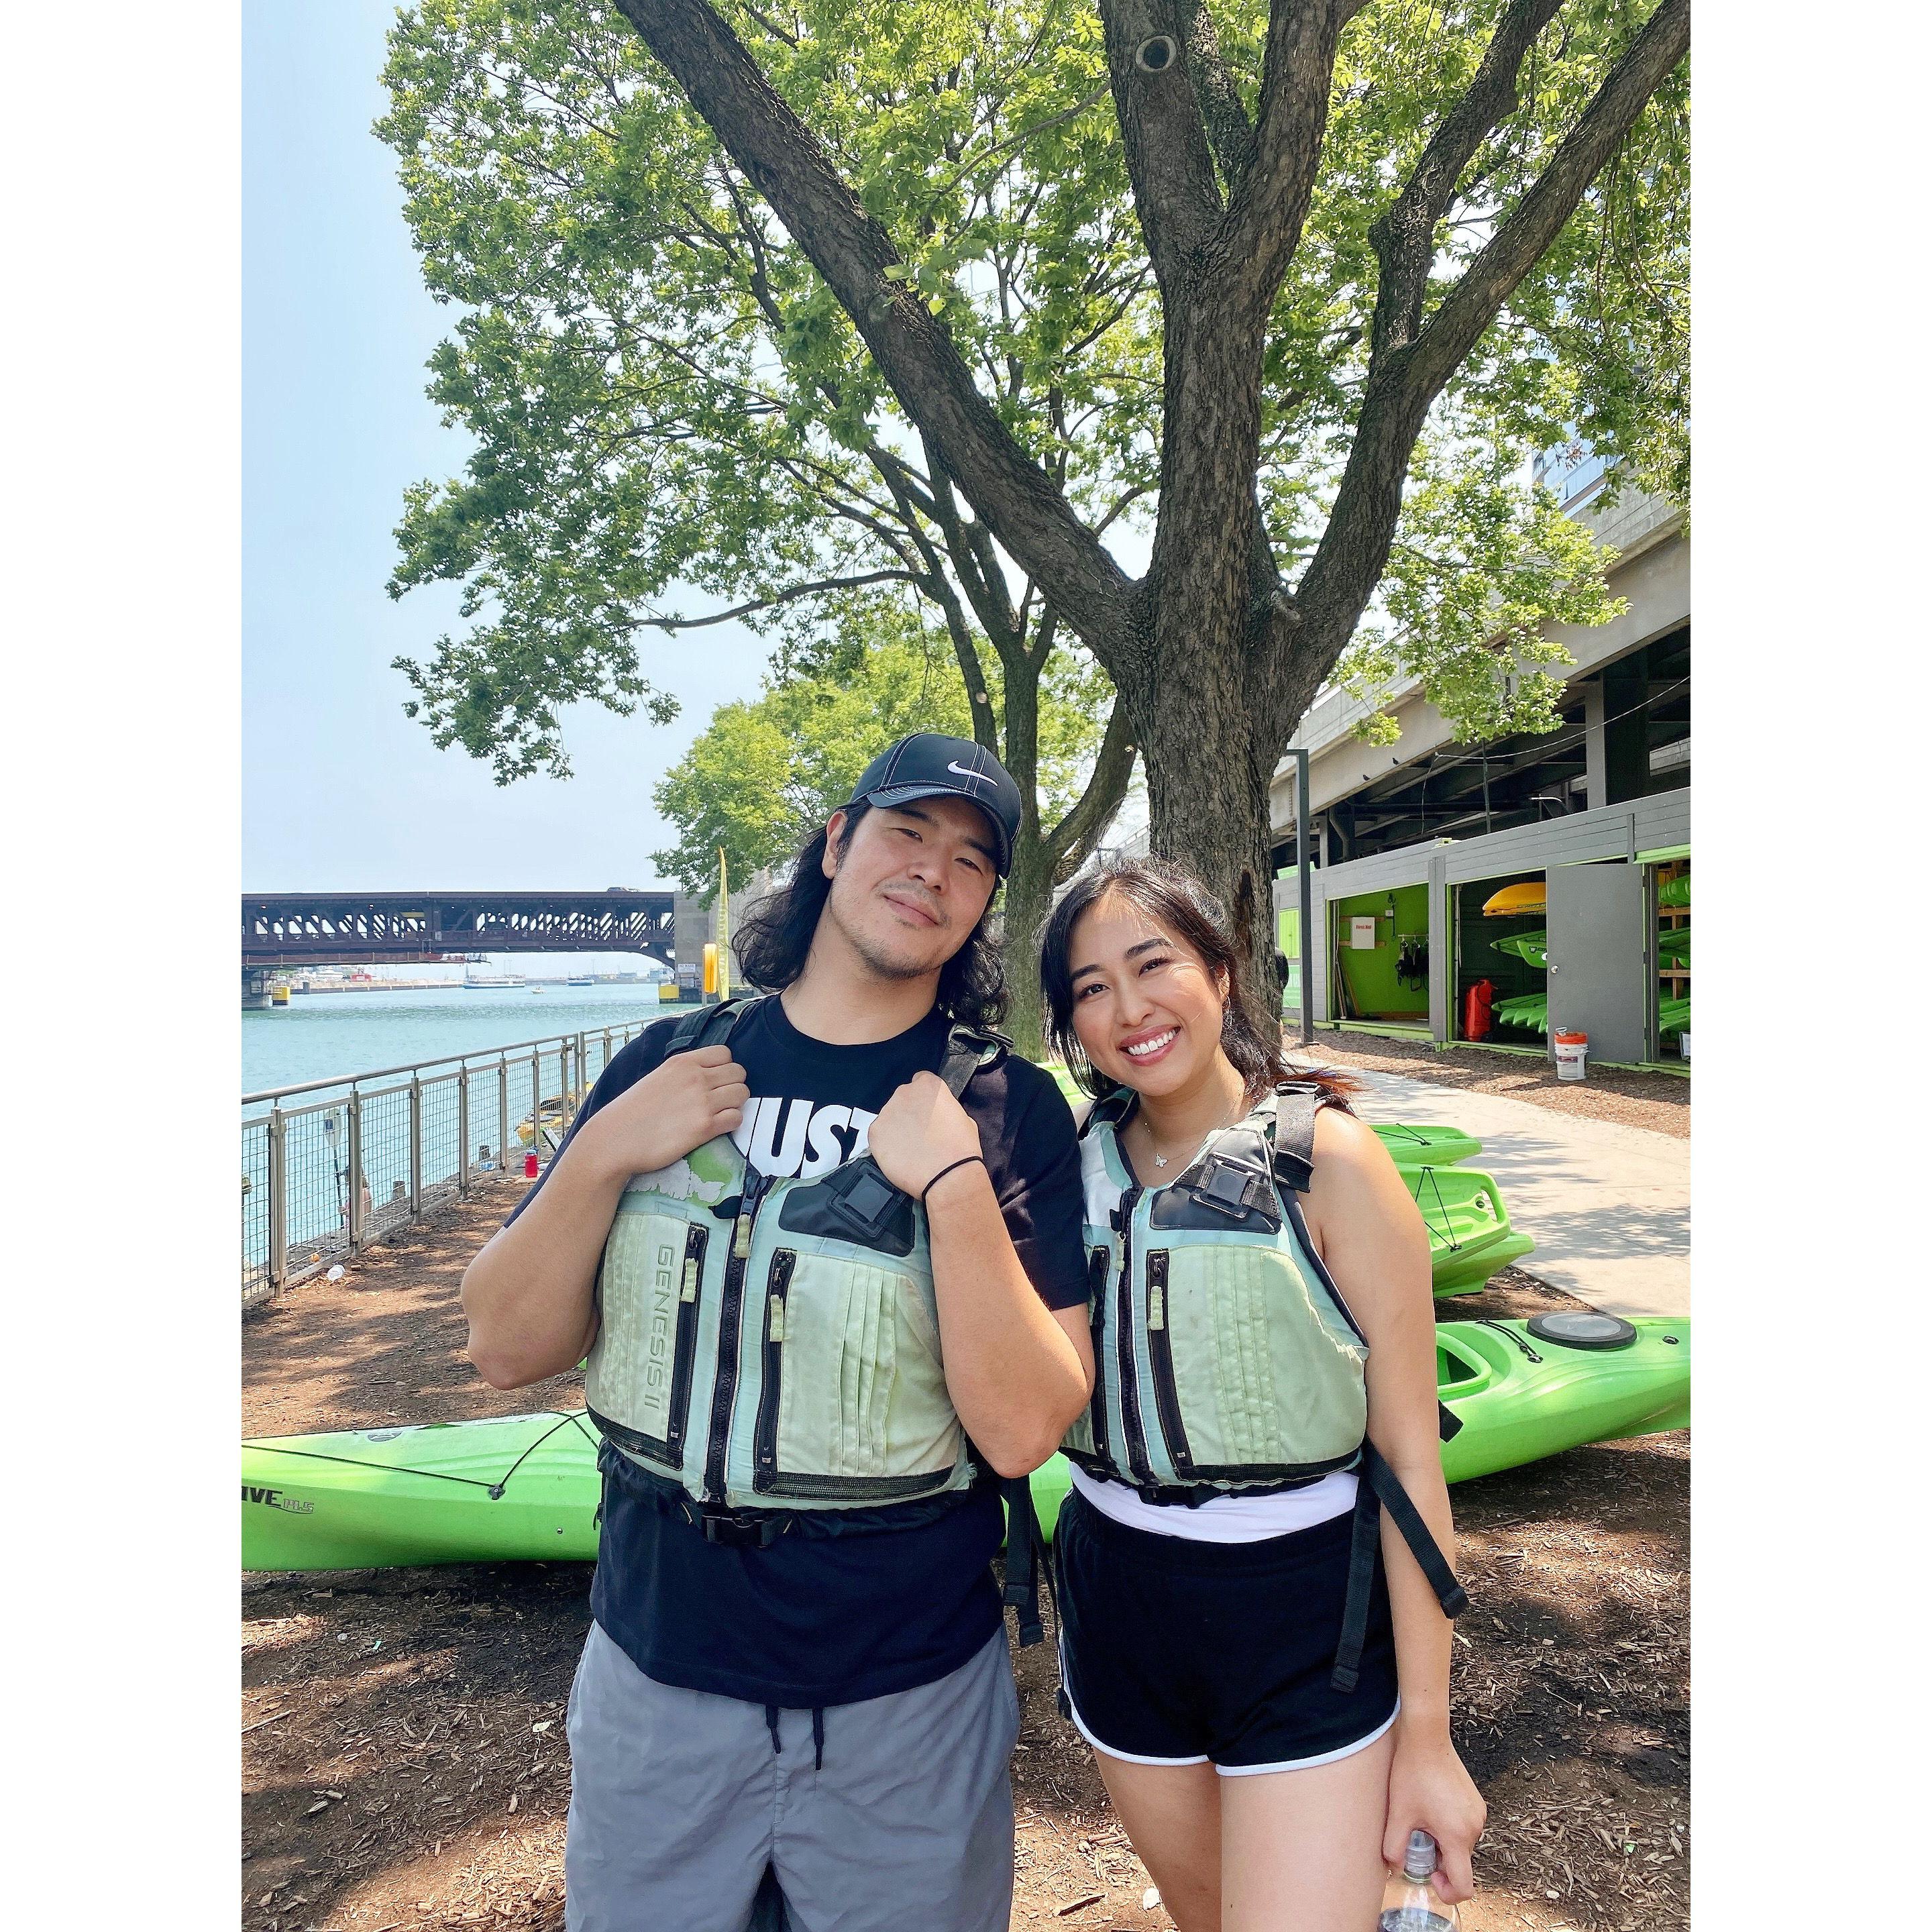 Our first time kayaking together!